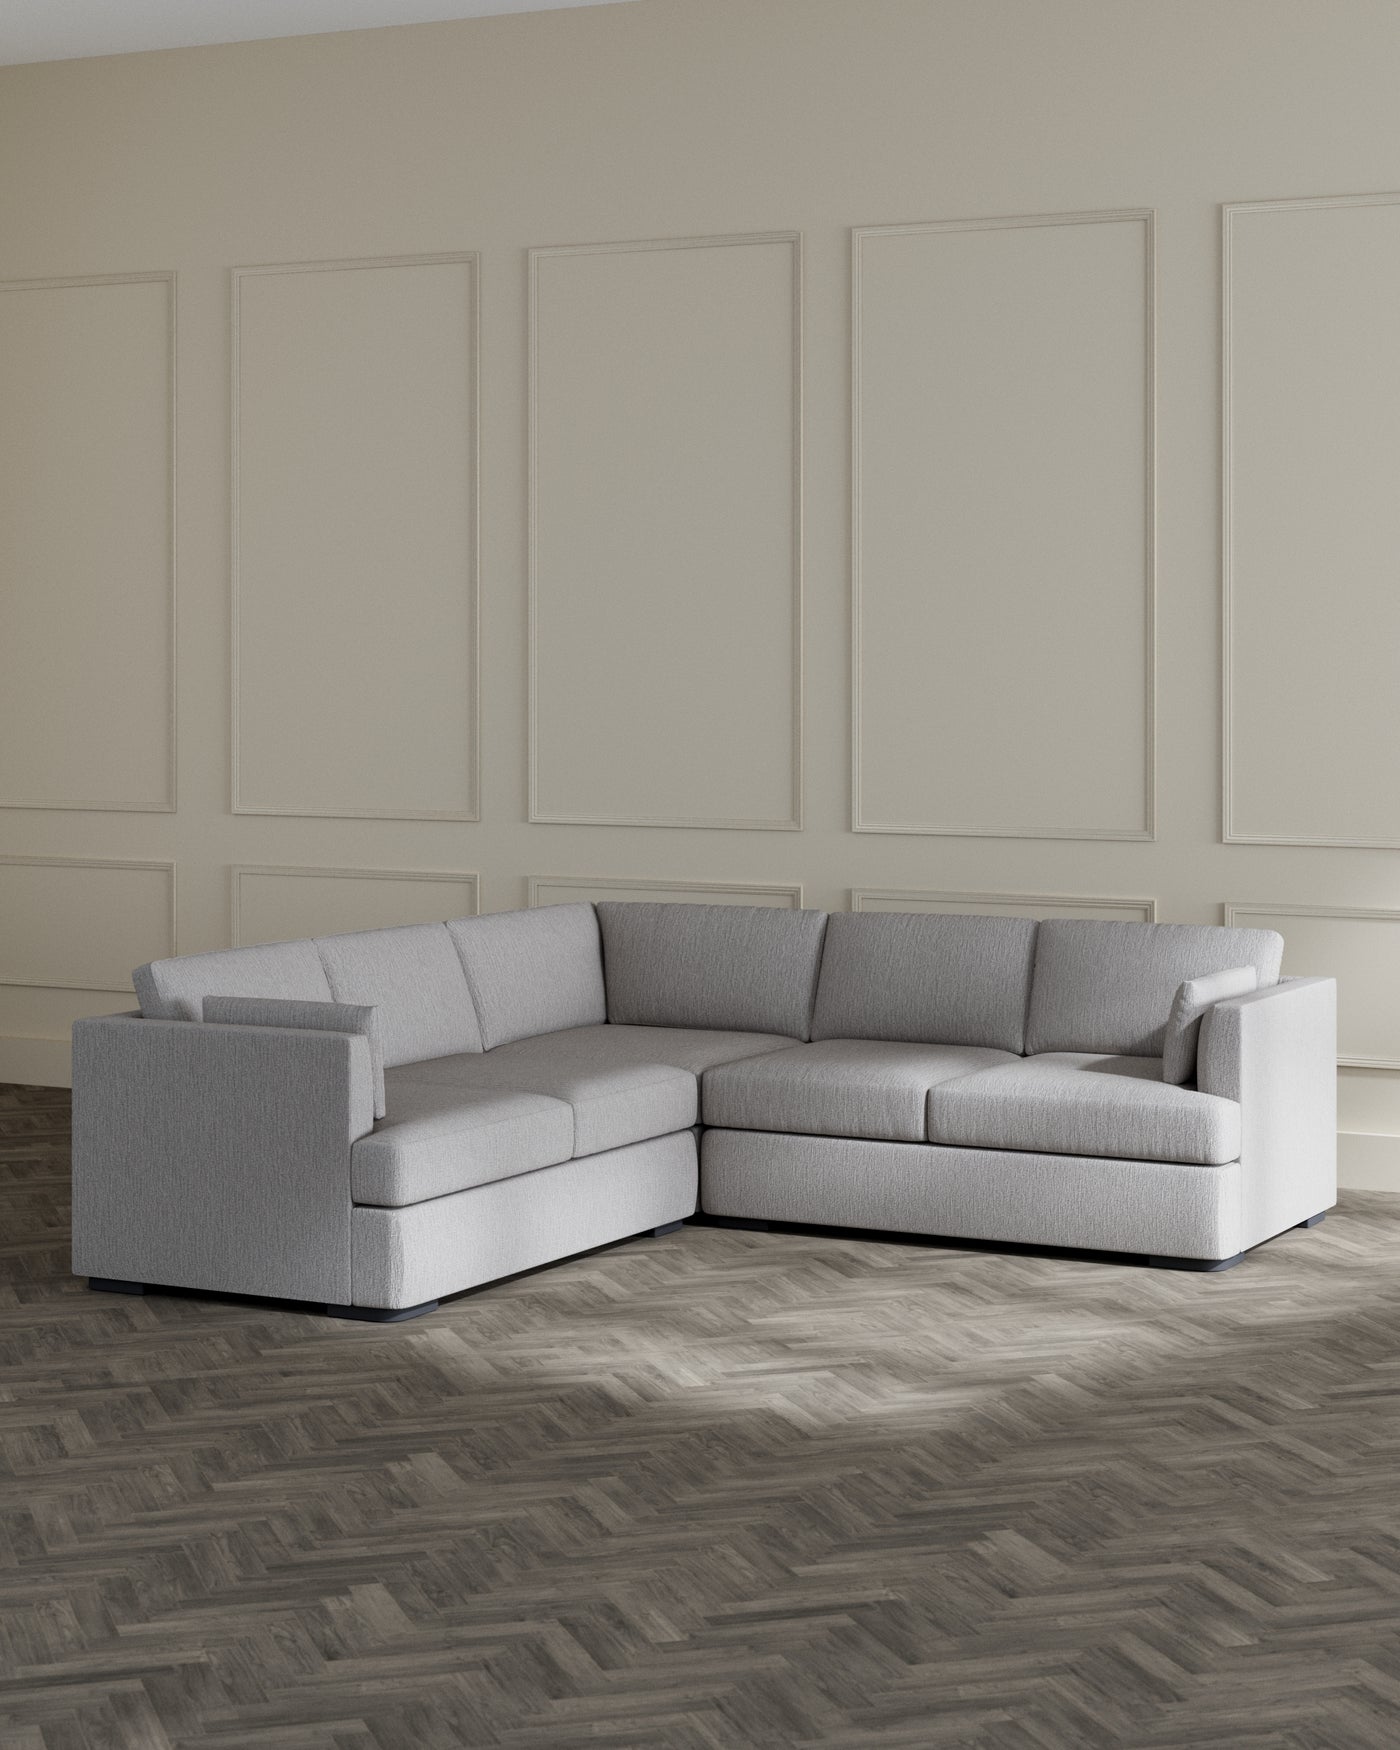 L-shaped grey fabric sectional sofa with a contemporary design and clean lines, set against a beige wall and on a herringbone pattern wooden floor.